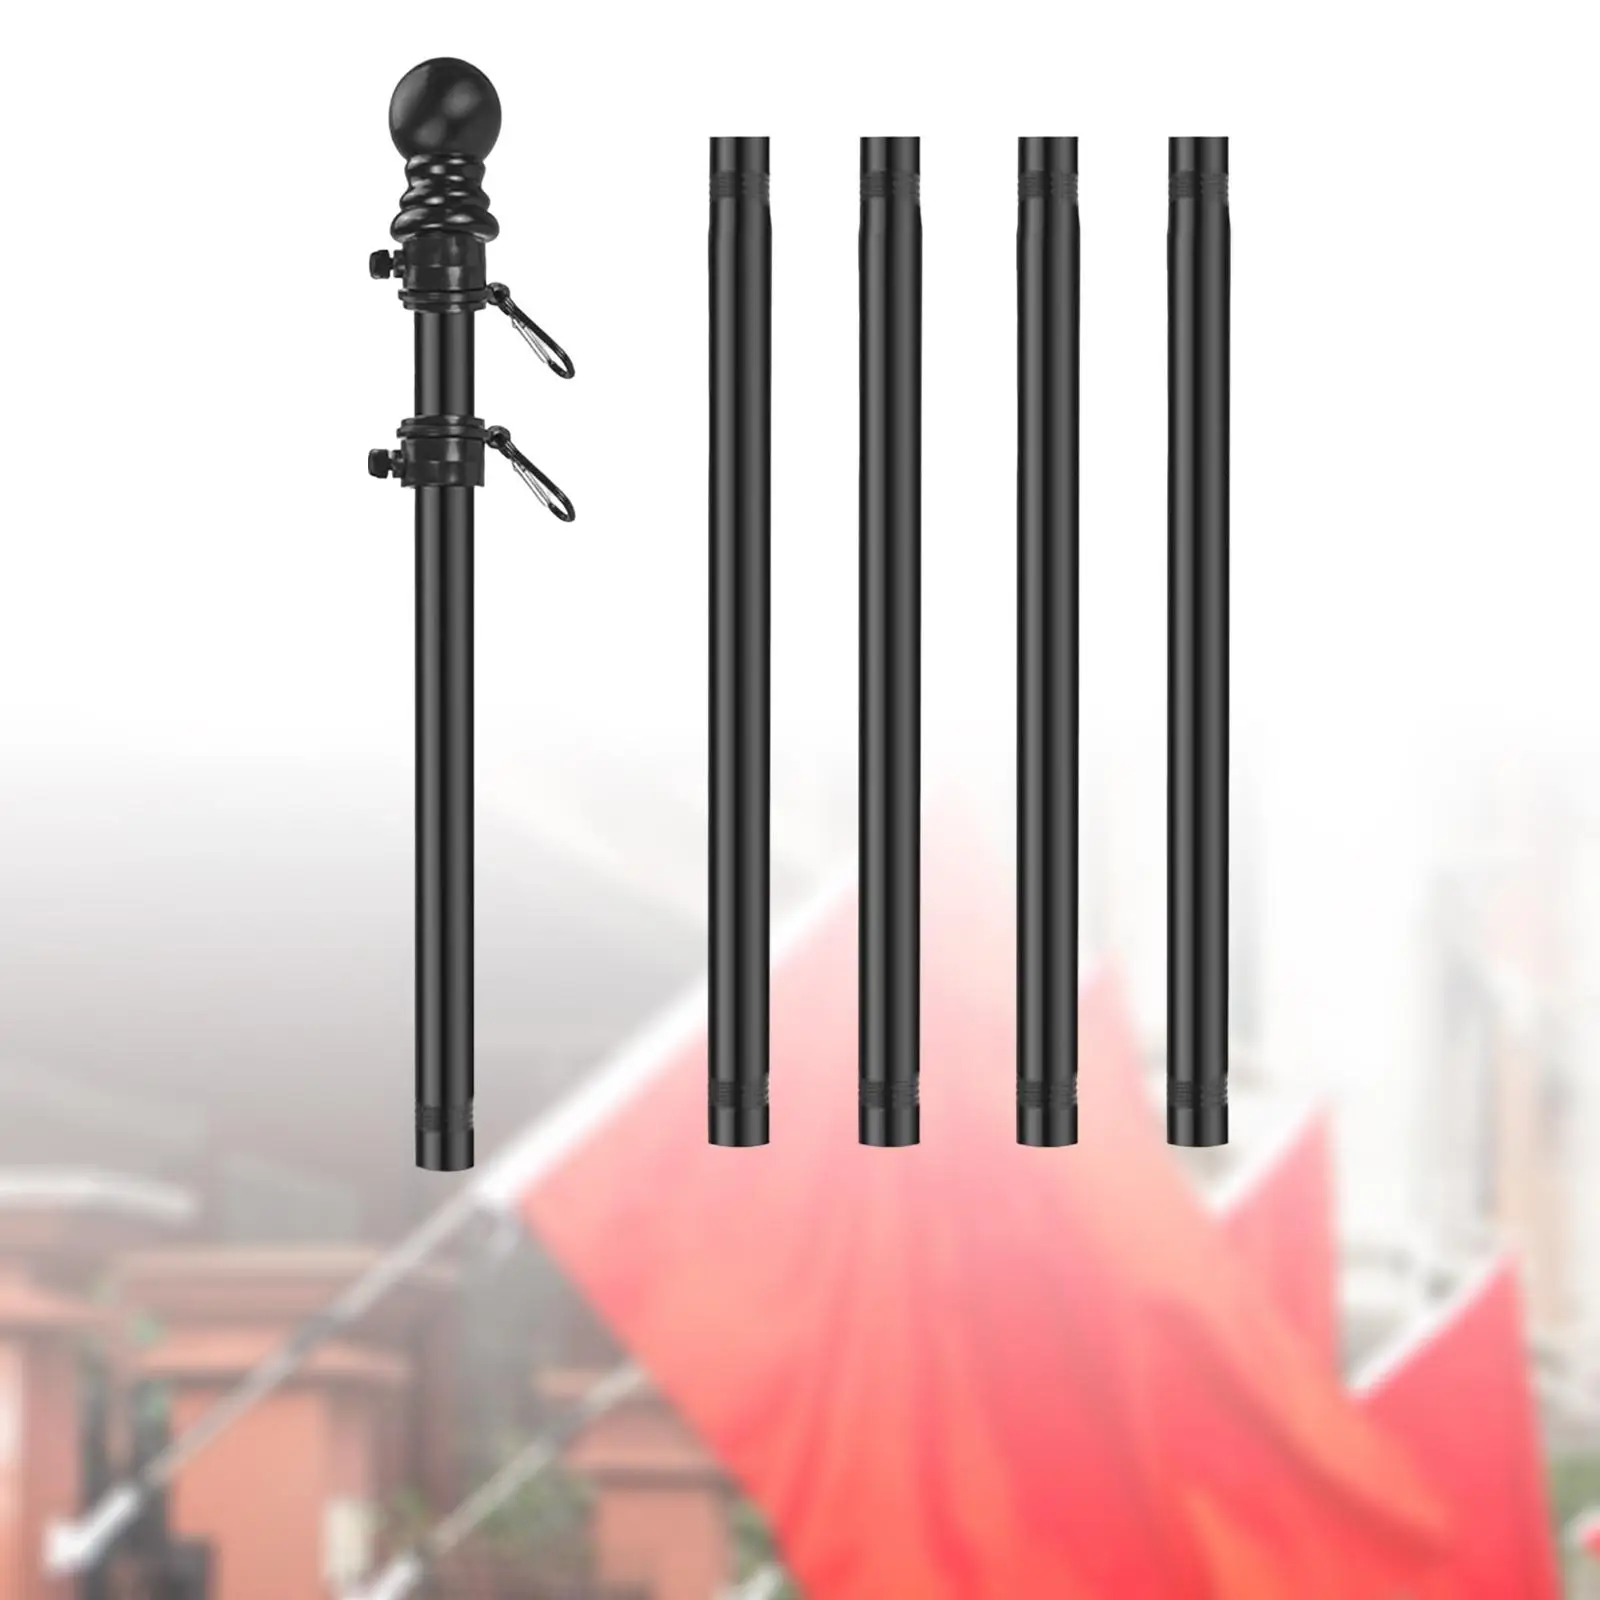 Spinning Flagpole Flag Pole Five Sections Rod Wall Mount Guide Banner Garden Flag Pole Truck and Kit